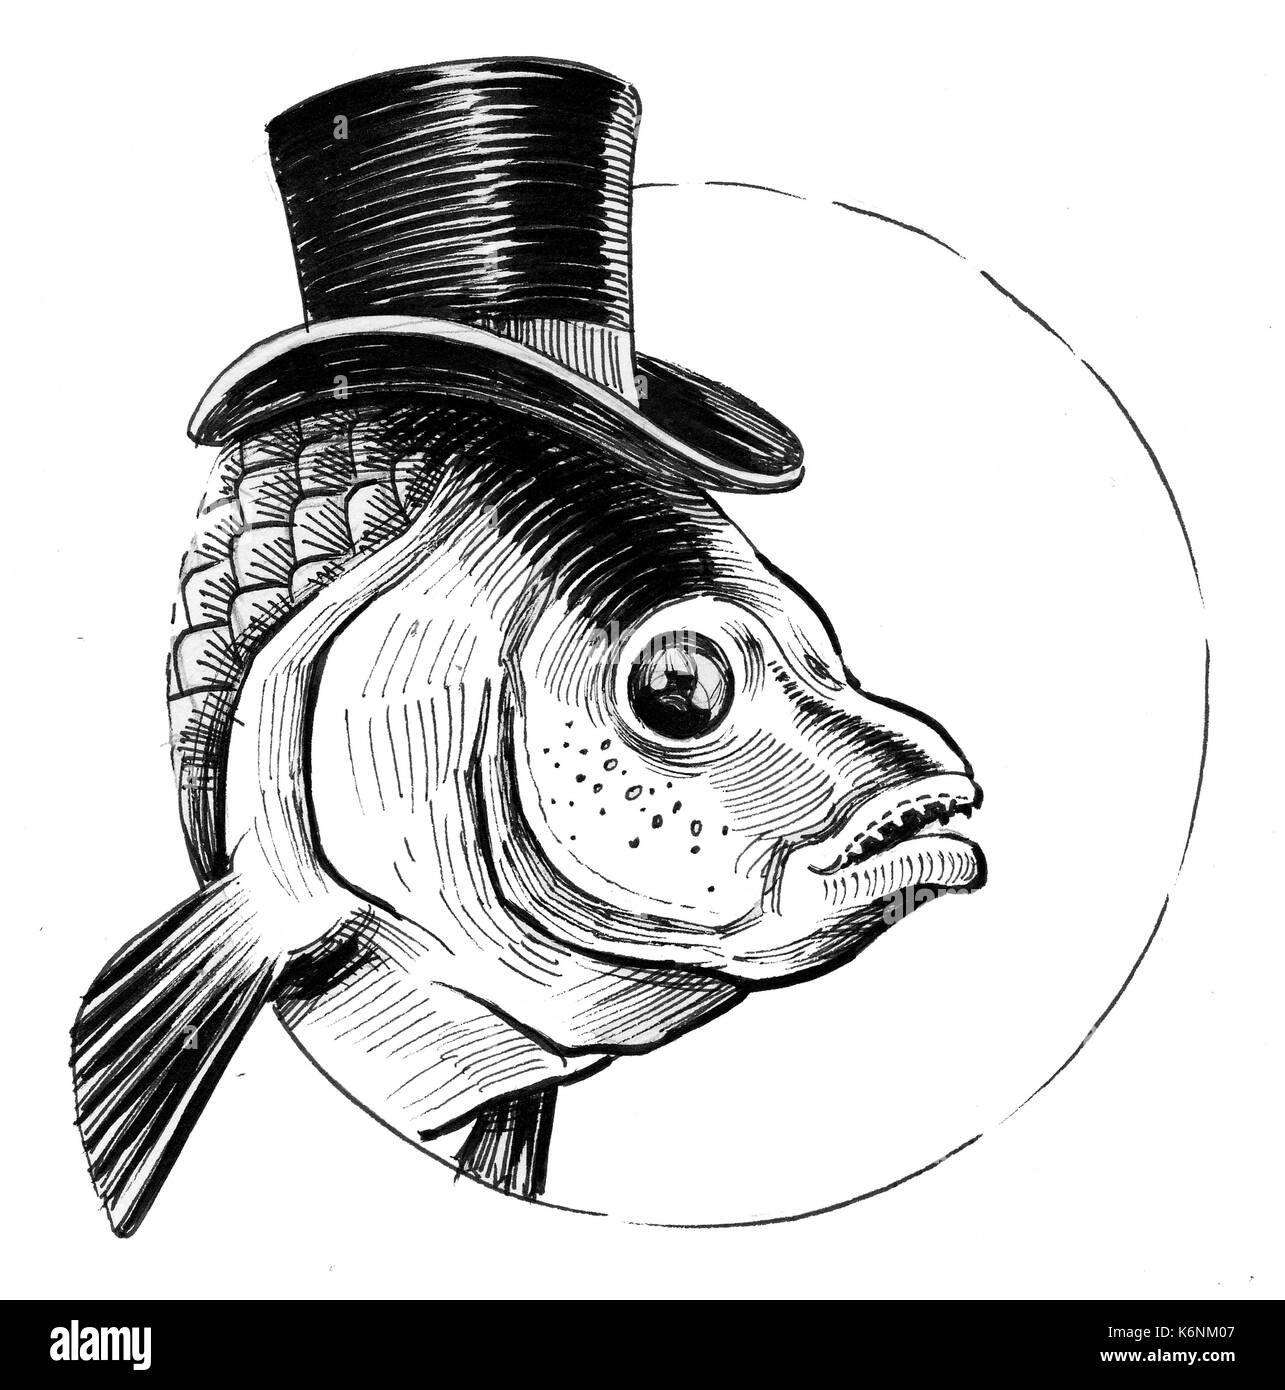 Fish with a tall hat Stock Photo - Alamy